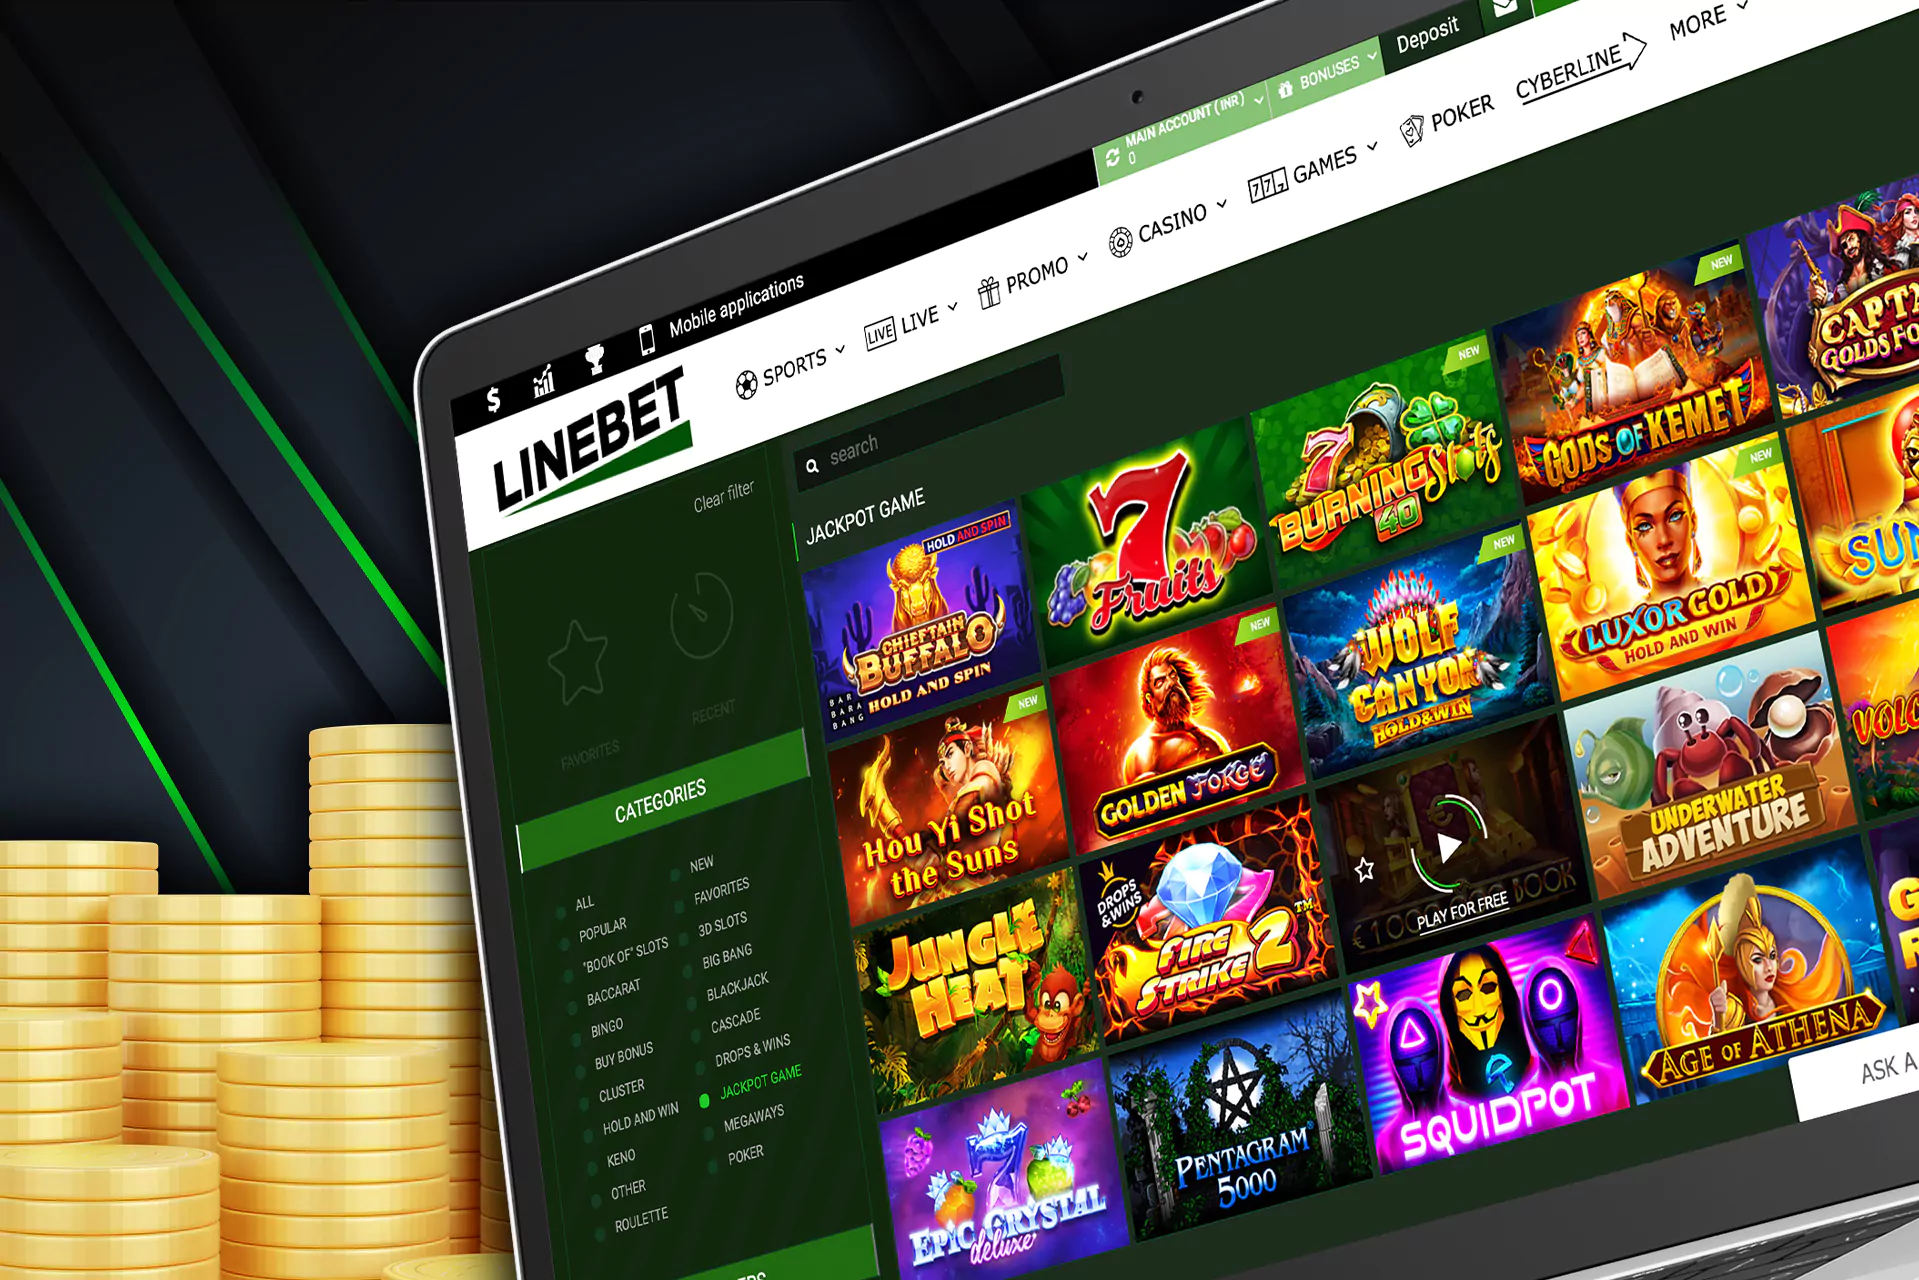 Try to win a jackpot in the specific game at Linebet.